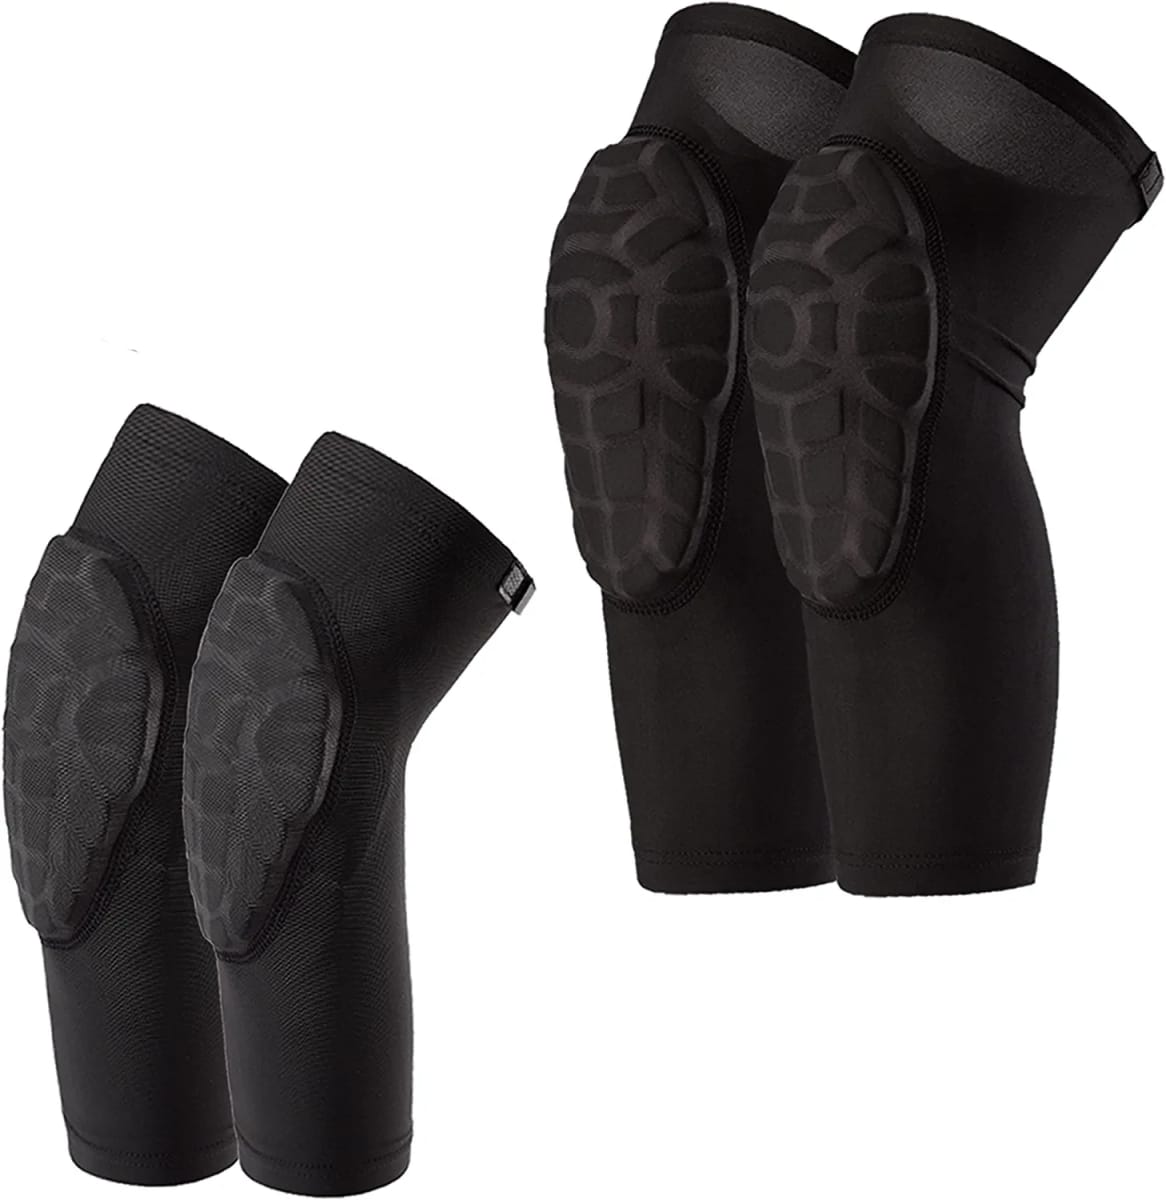 Kids Knee Pads and Elbow Pads Set